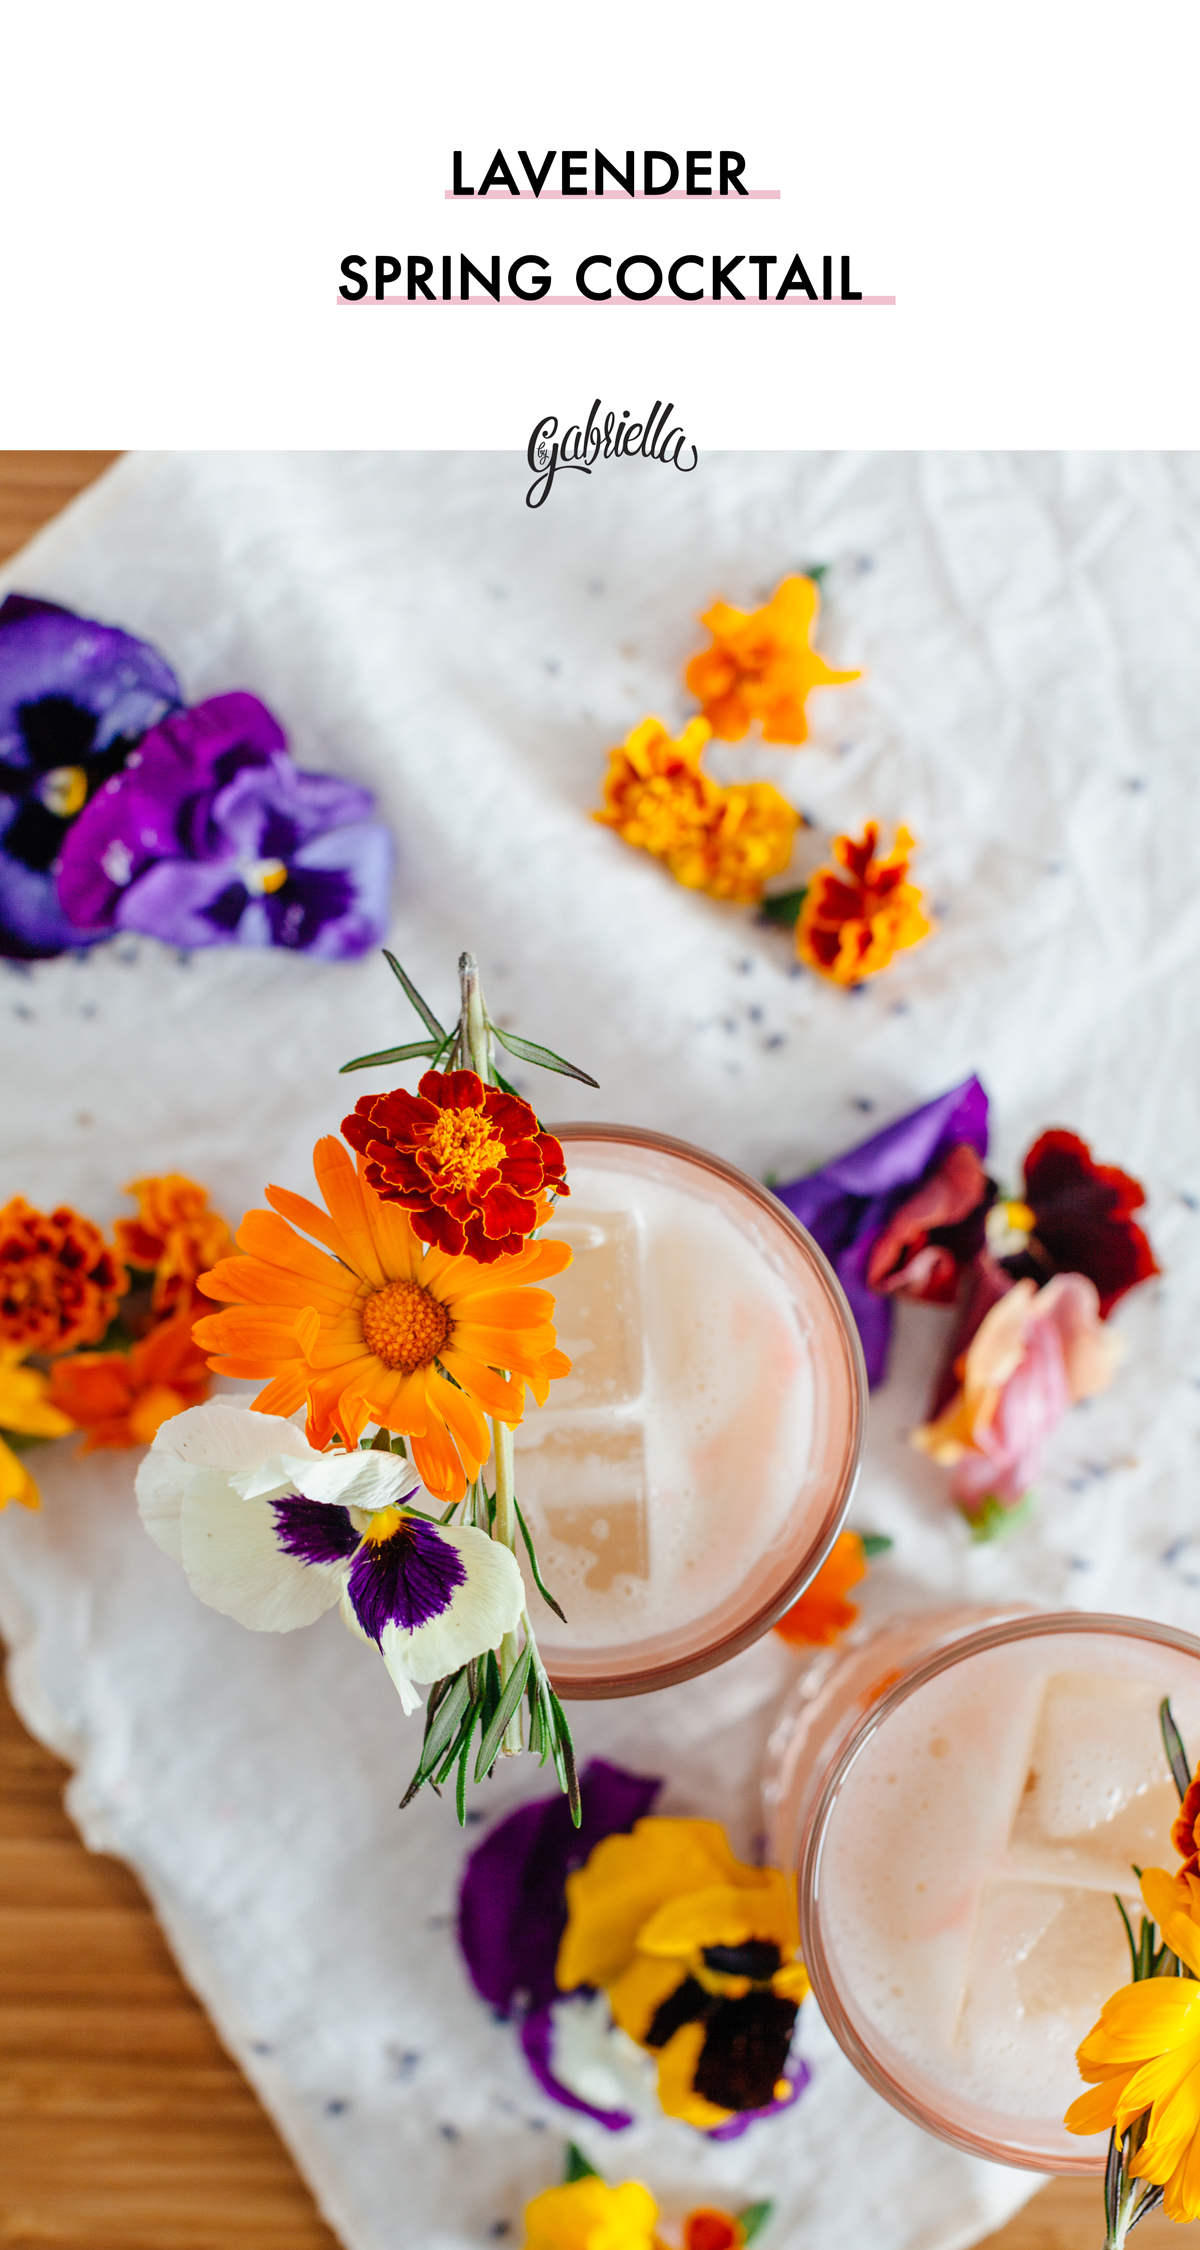 A perfectly spring-y cocktail: The Lavender Milk Punch with lavender extract and edible flowers. | bygabriella.co @gabivalladares